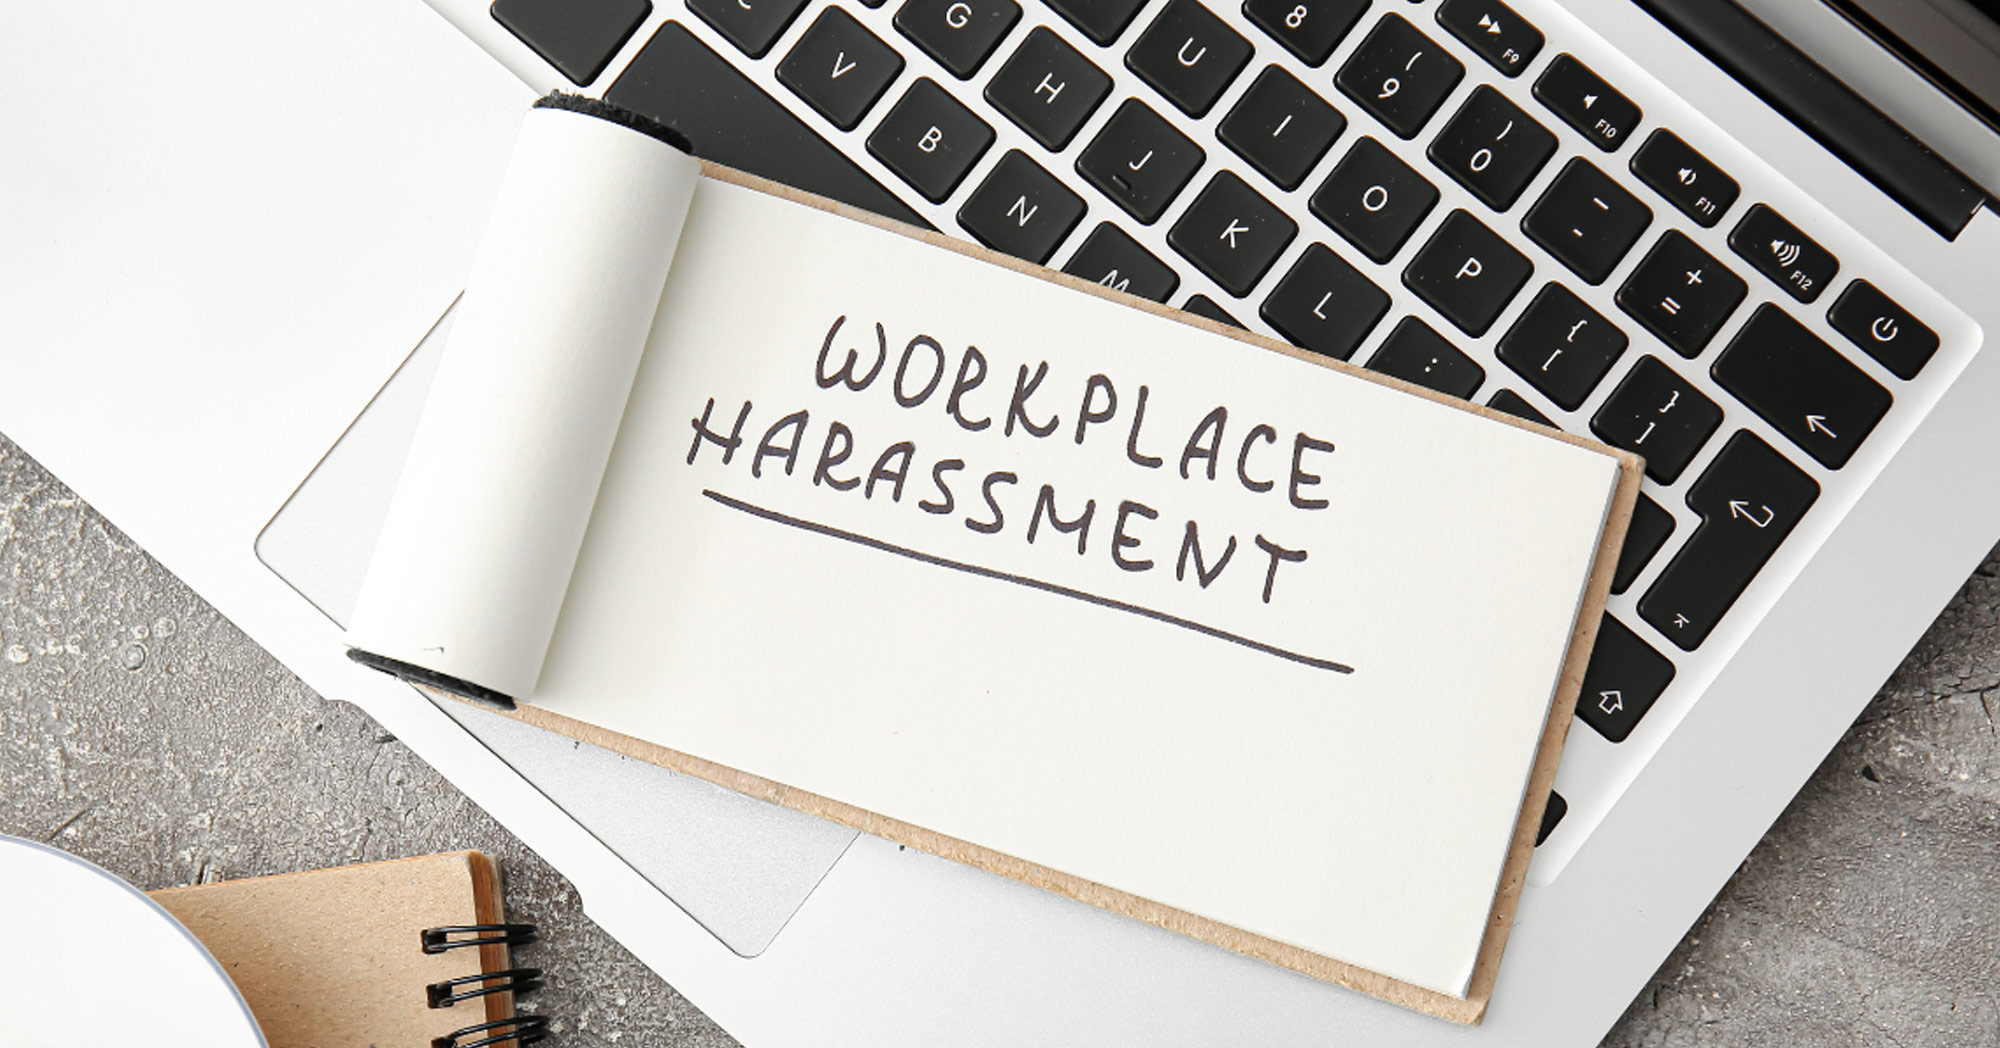 Preventing workplace harassments